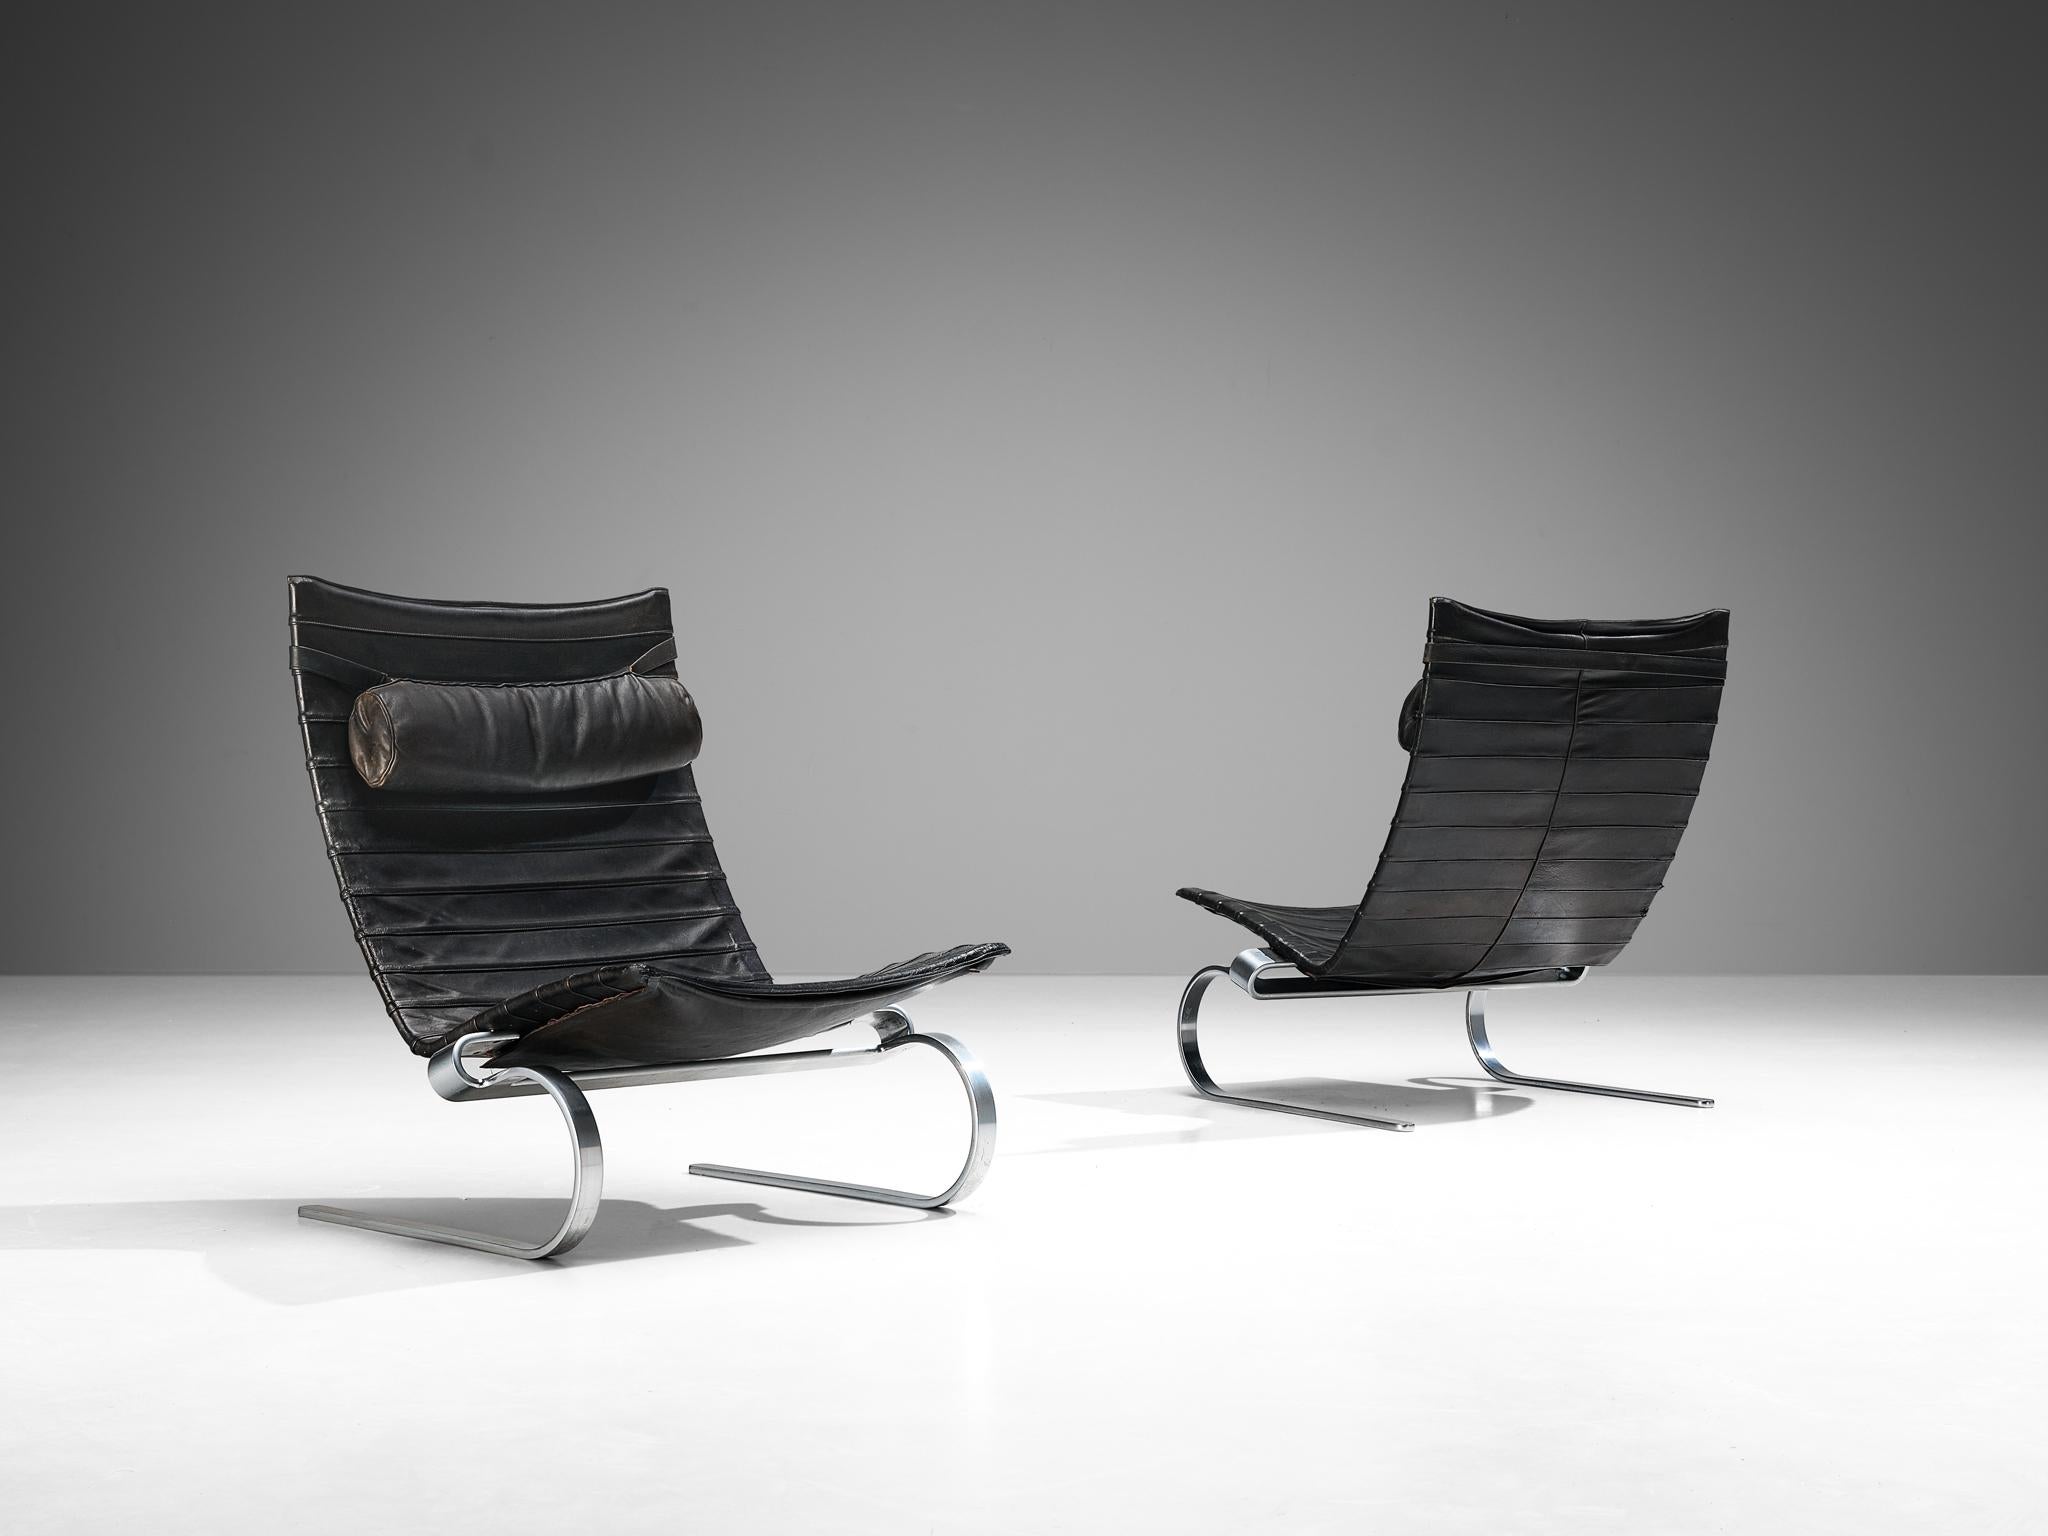 Poul Kjærholm for E. Kold Christensen, pair of lounge chairs model 'PK20', leather, chrome-plated steel, Denmark, 1968

A highly modern design that embraces clear lines and curvaceous shapes. A cantilever chair is all about ease and comfort as it